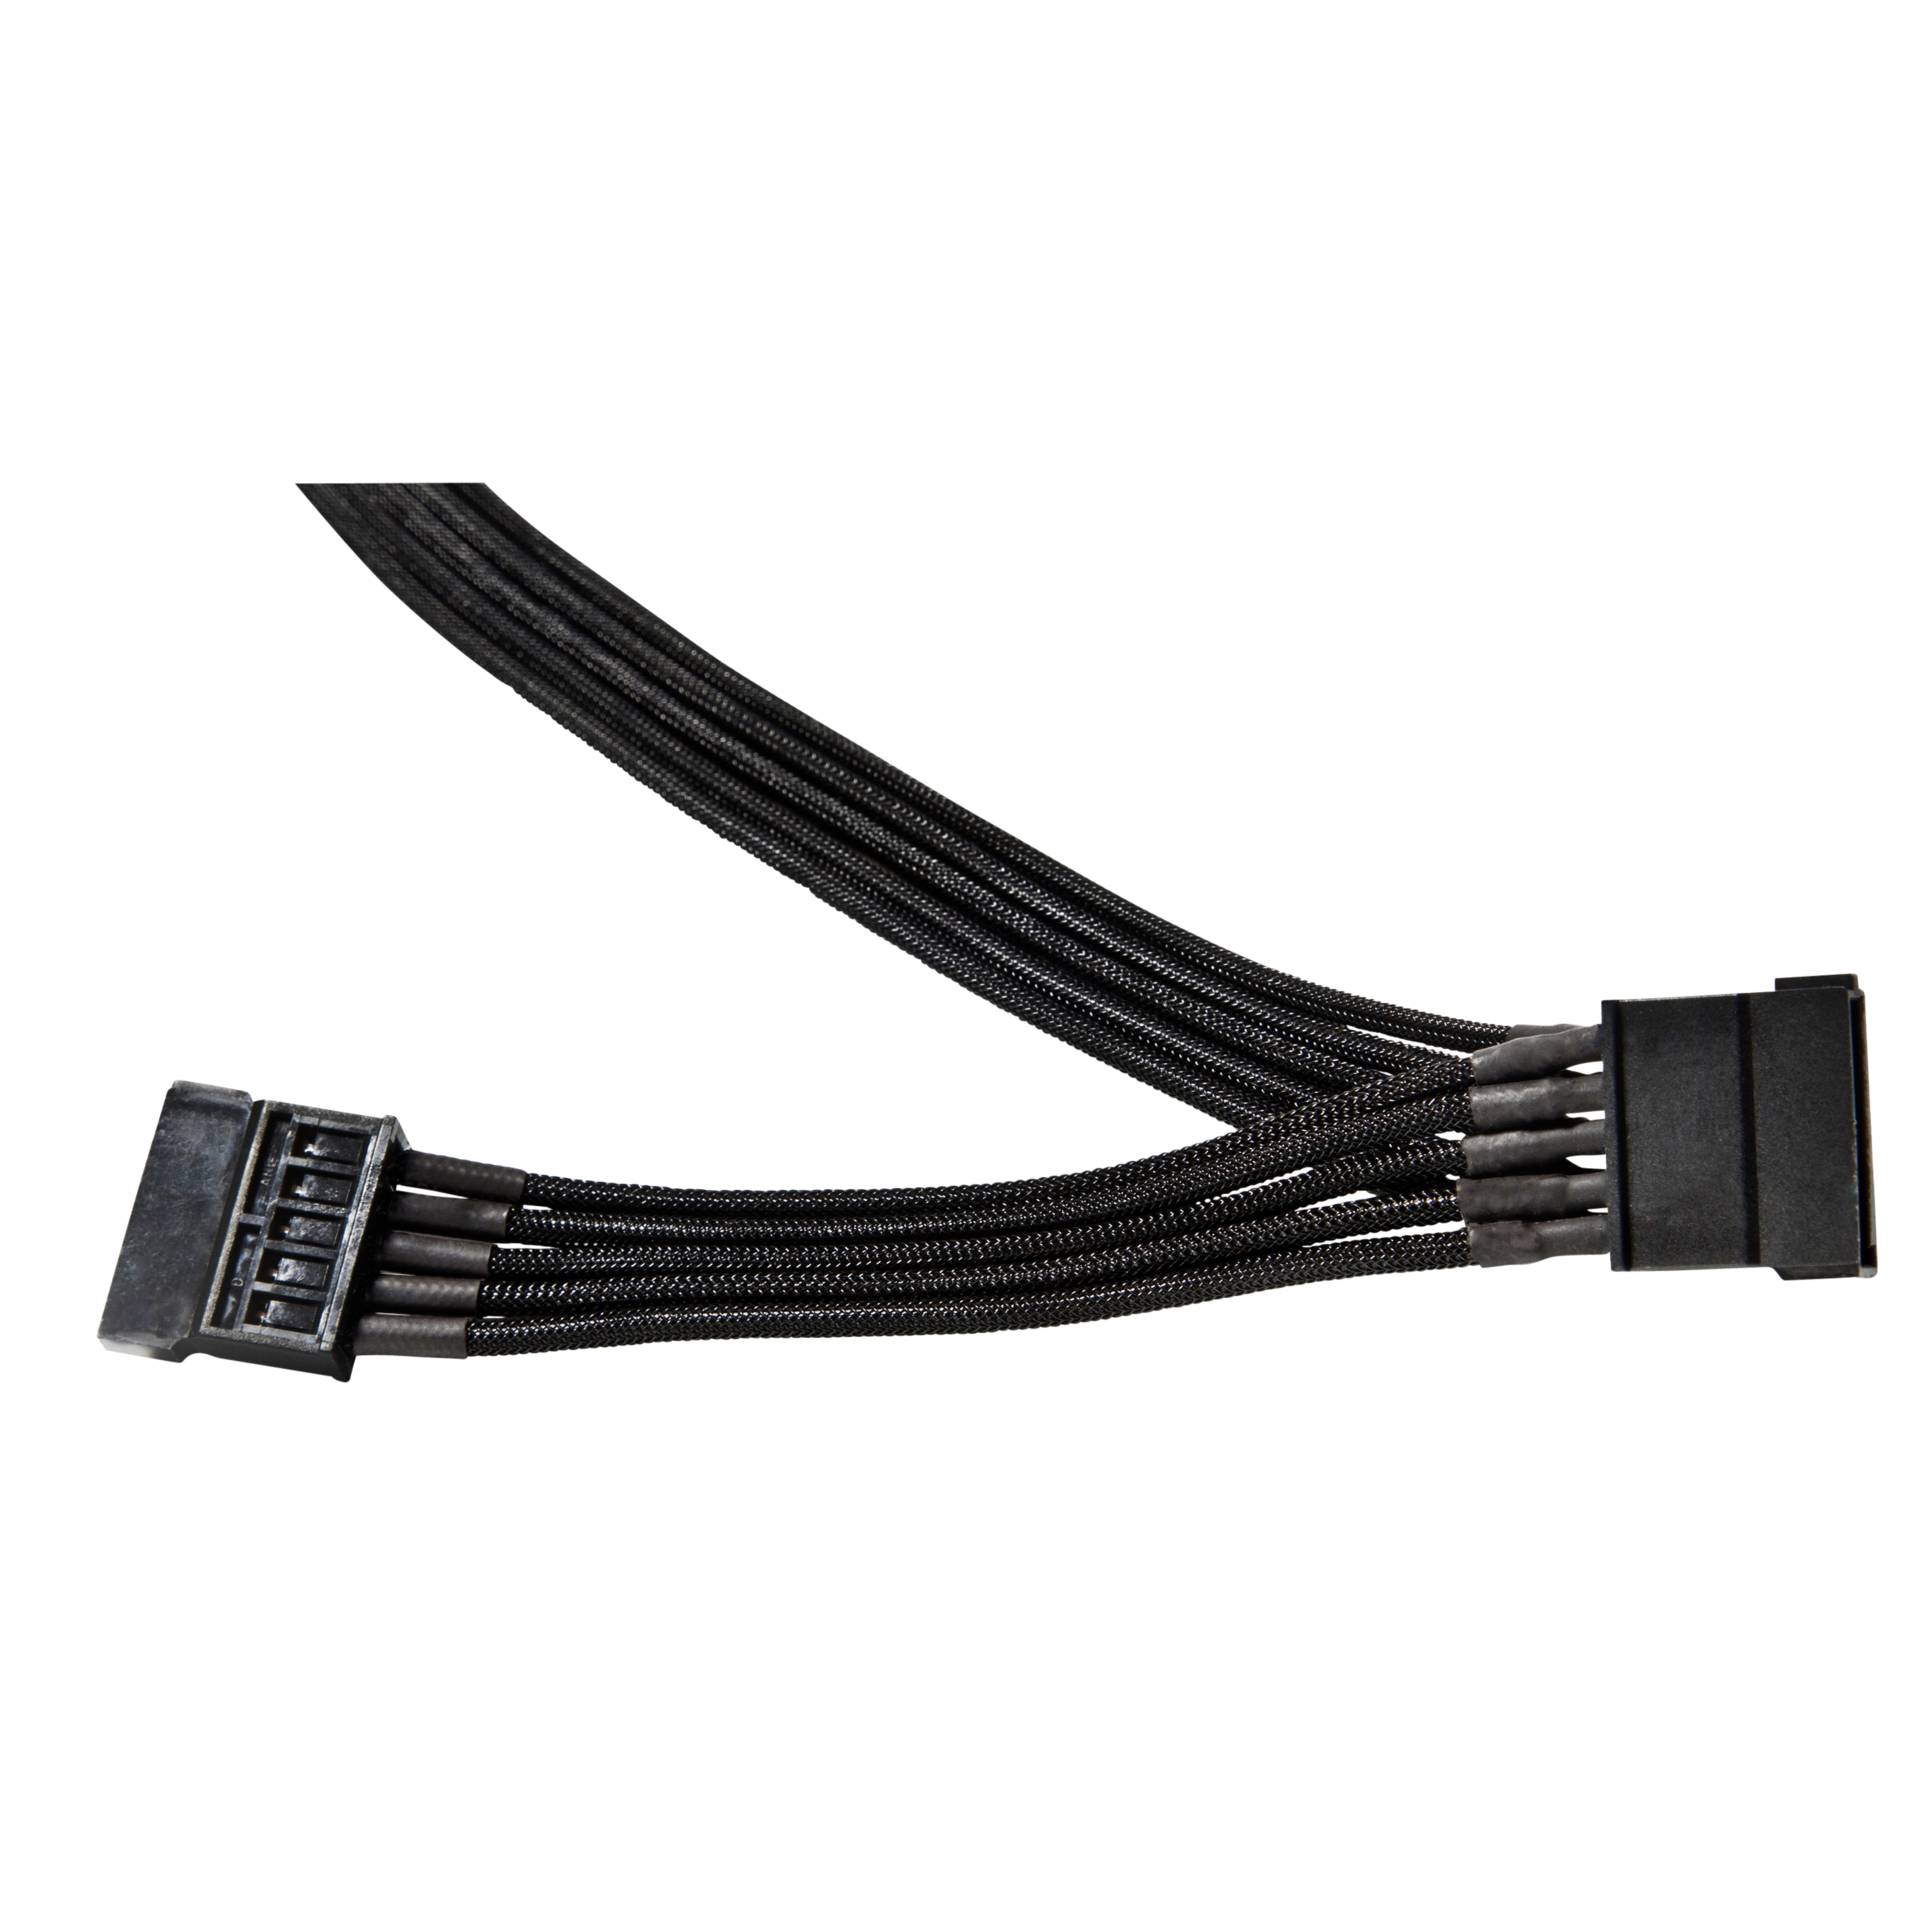 0,72m be quiet! Sleeved Power Cable CS-6720, 2x SATA 